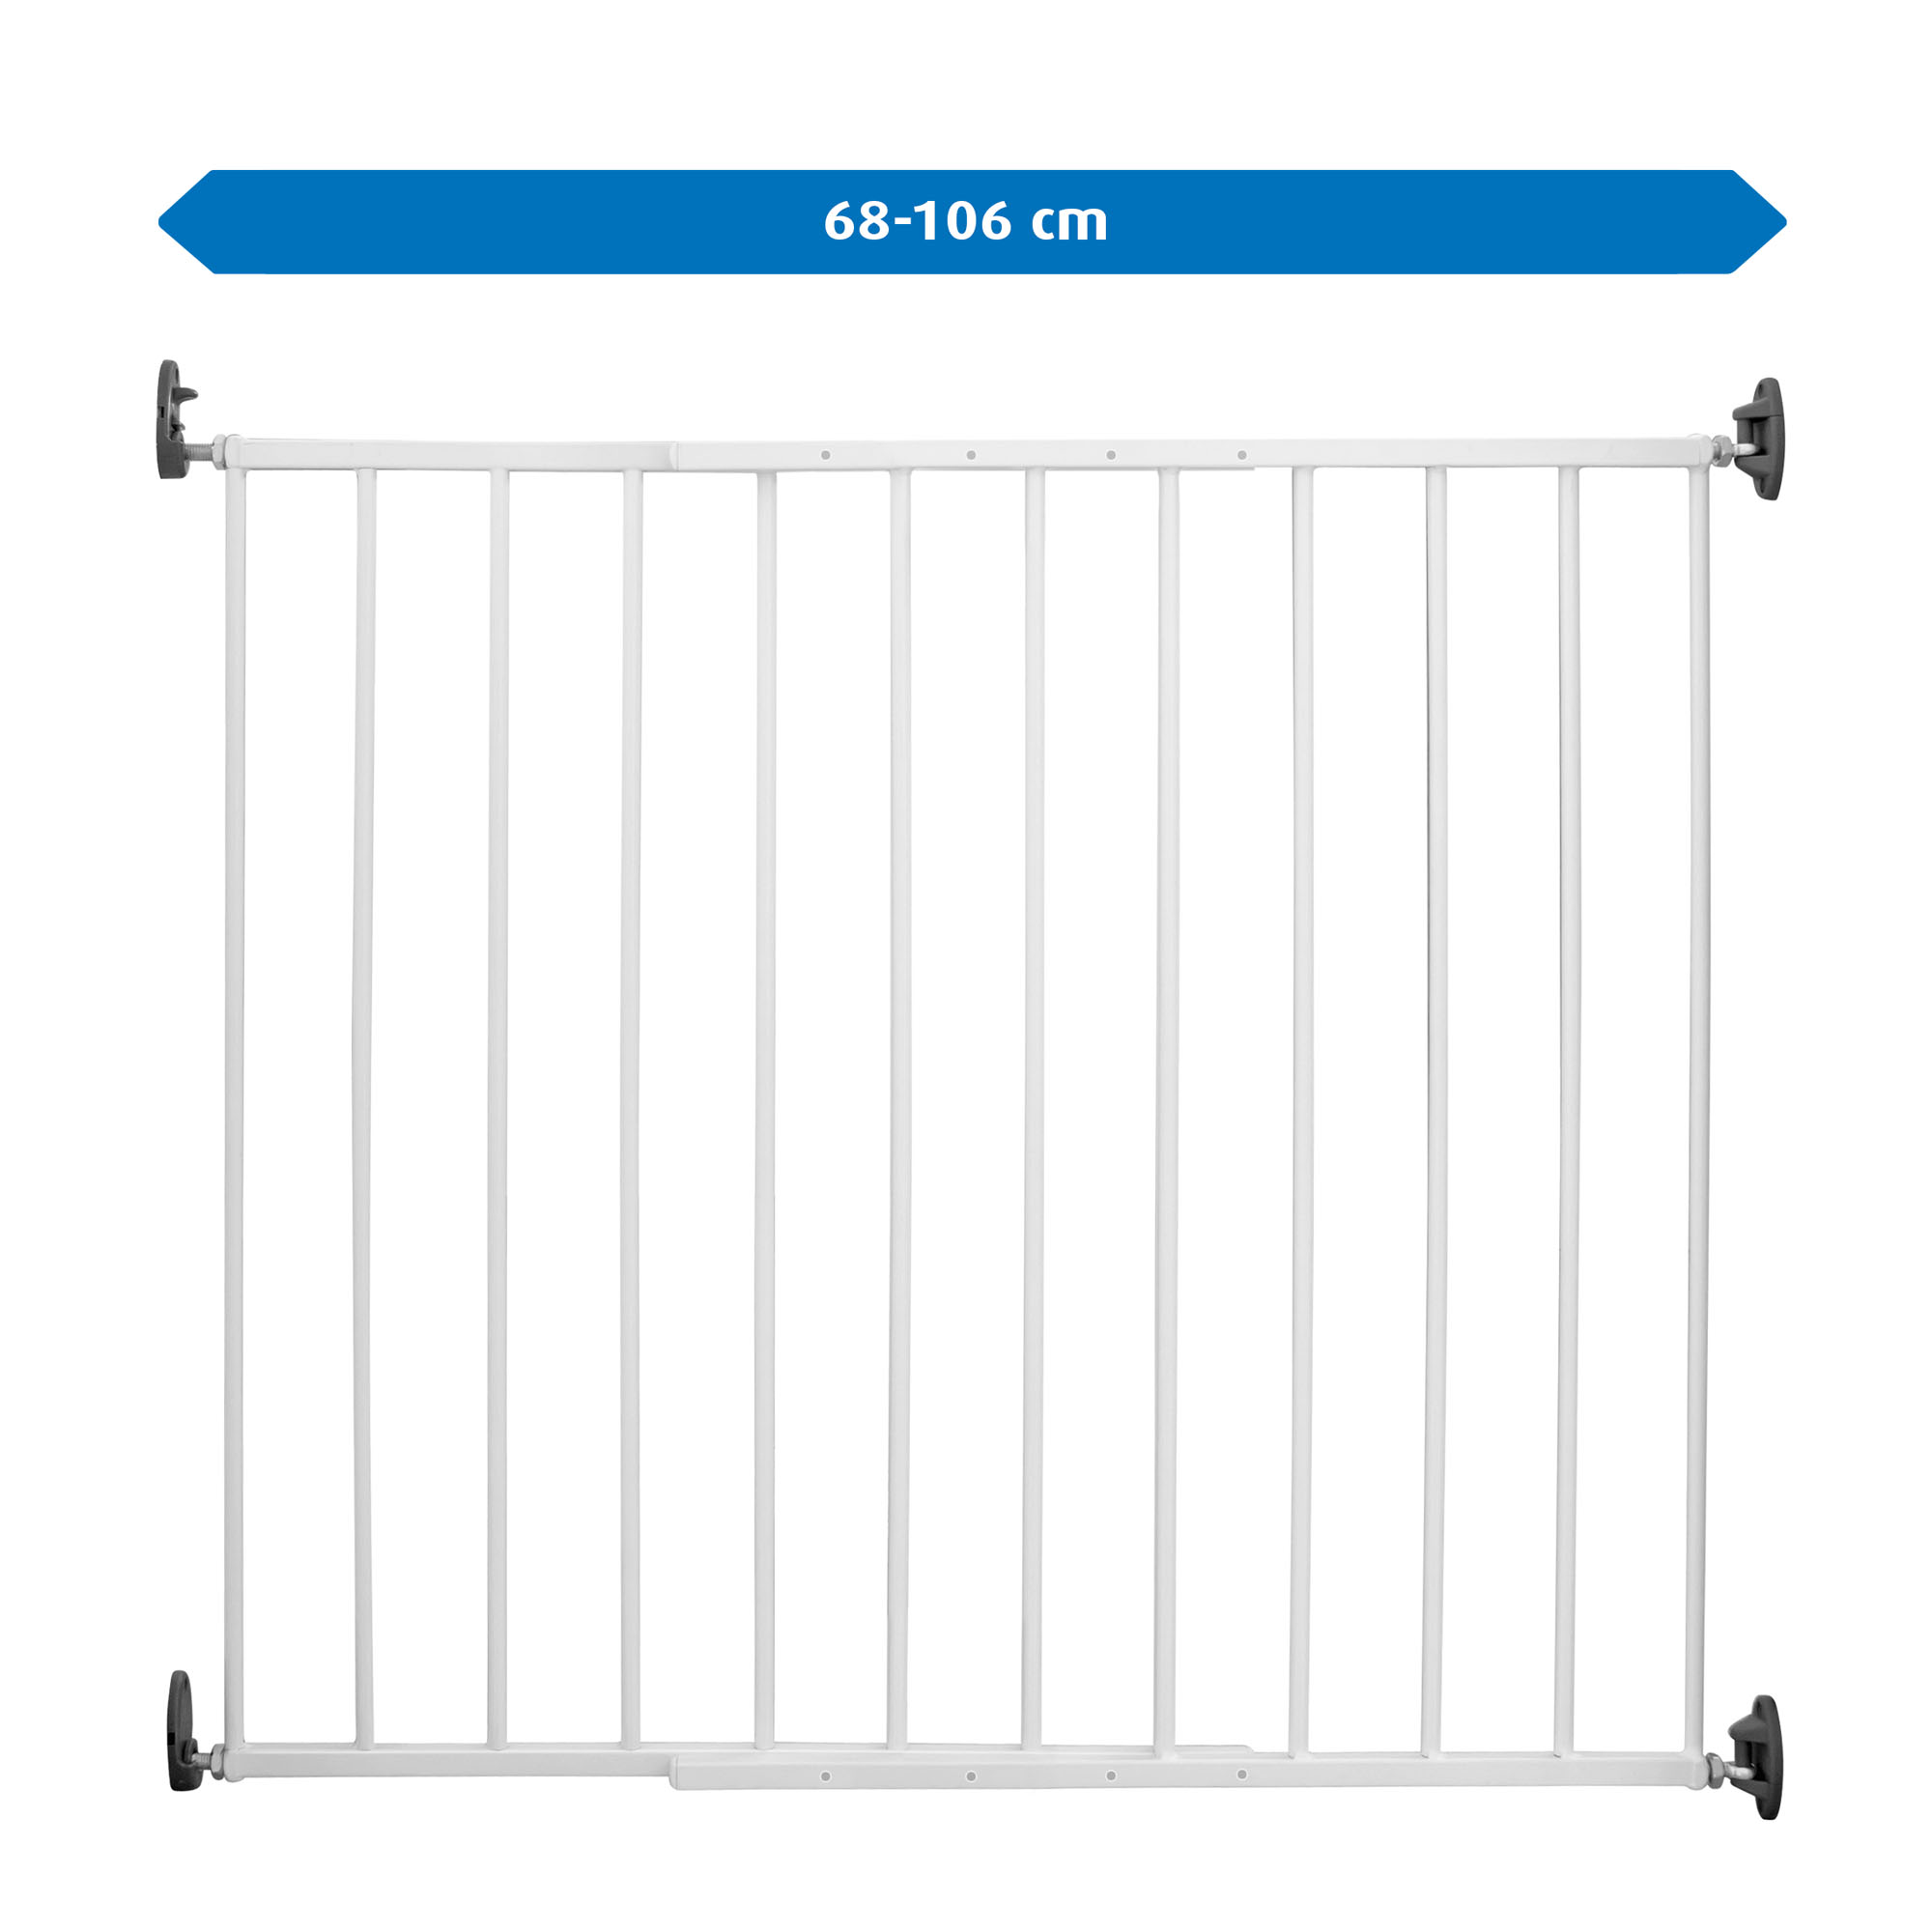 Basic wall-mounted gate for gateway widths from 68 - 106 cm